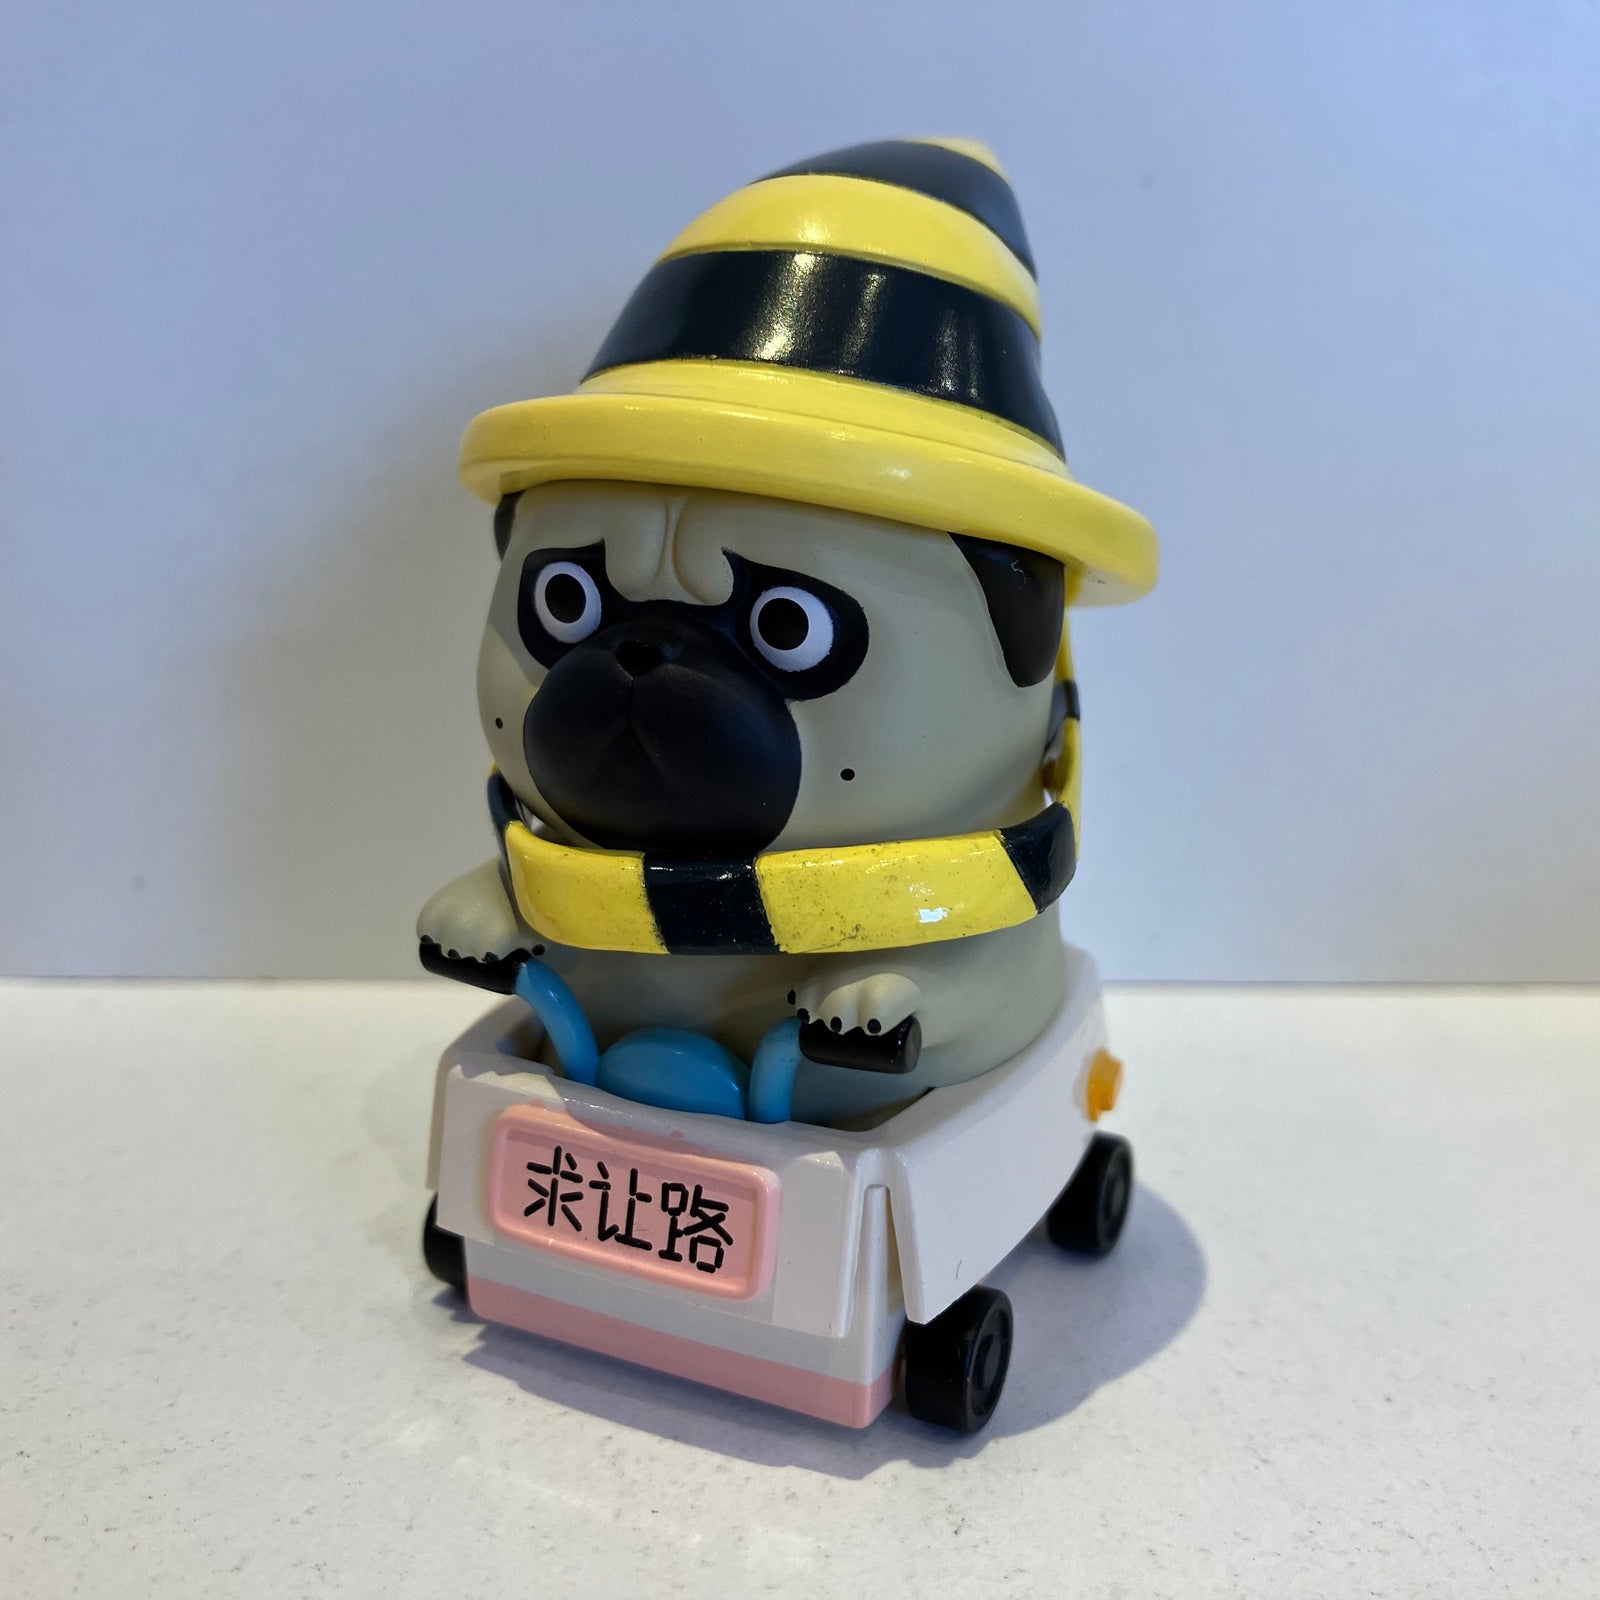 Hat Pileon Pug Riding - Wuhang Watch out by 52Toys - 1